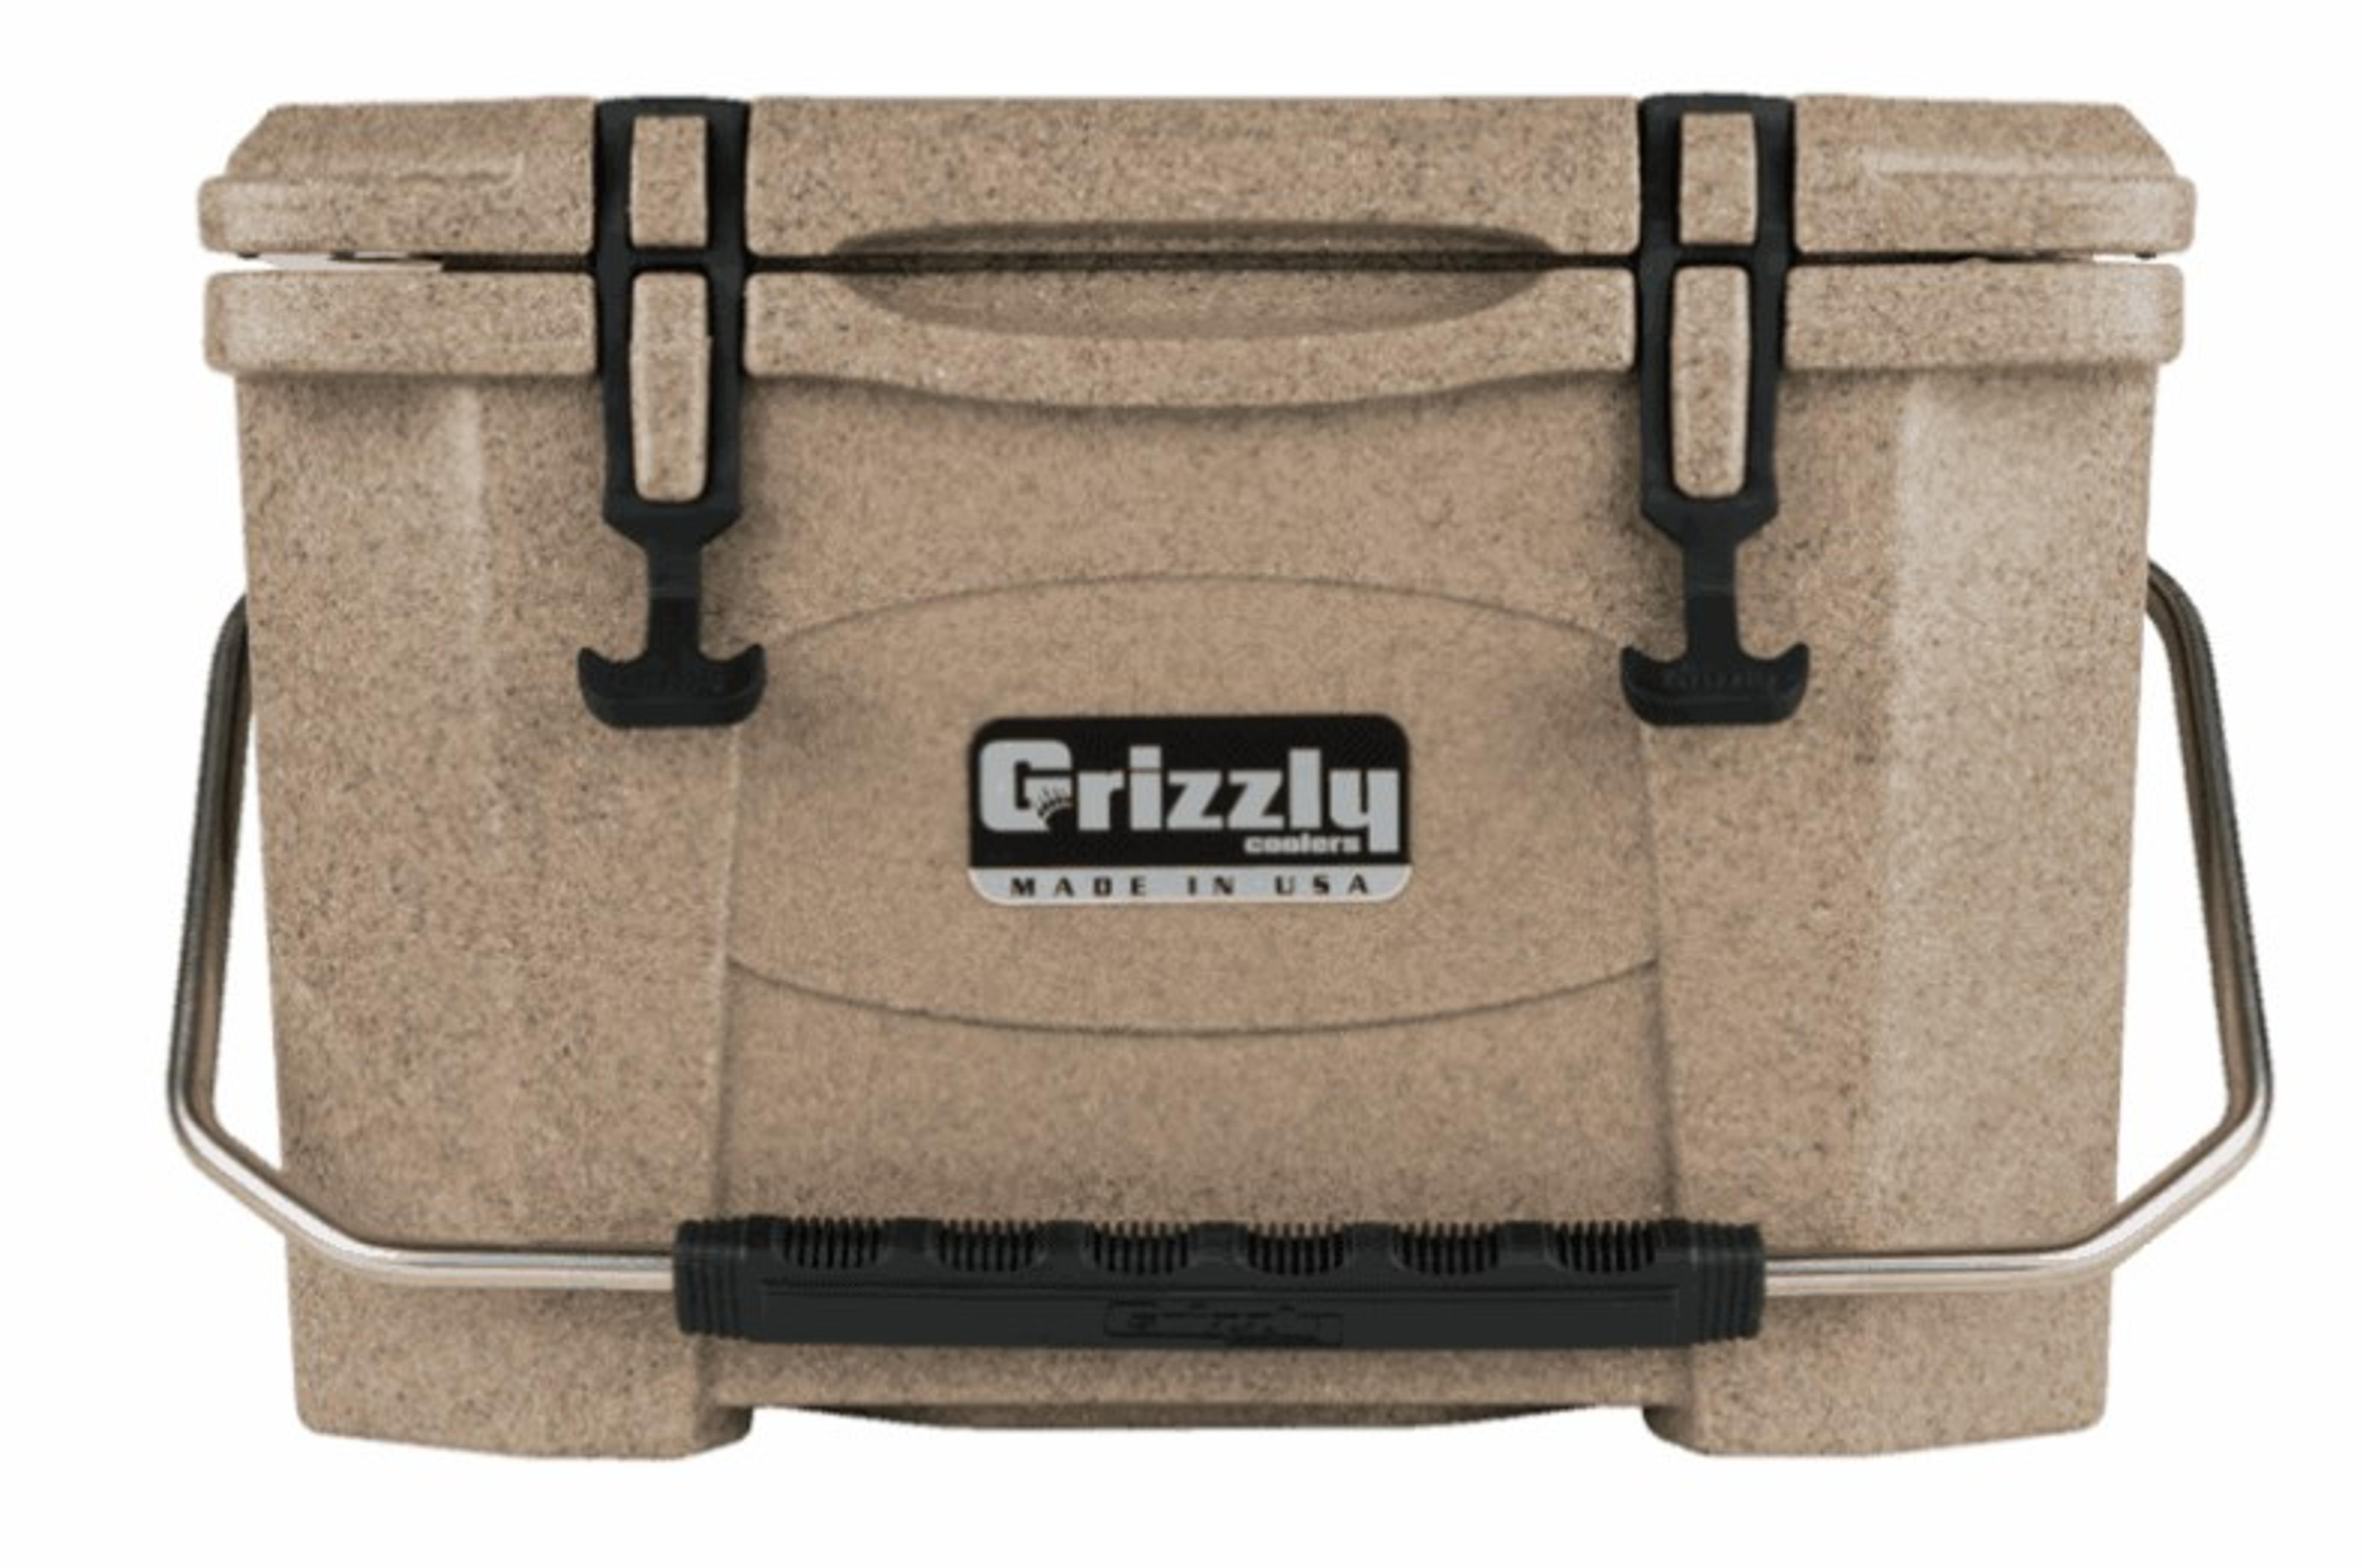  Grizzly 20